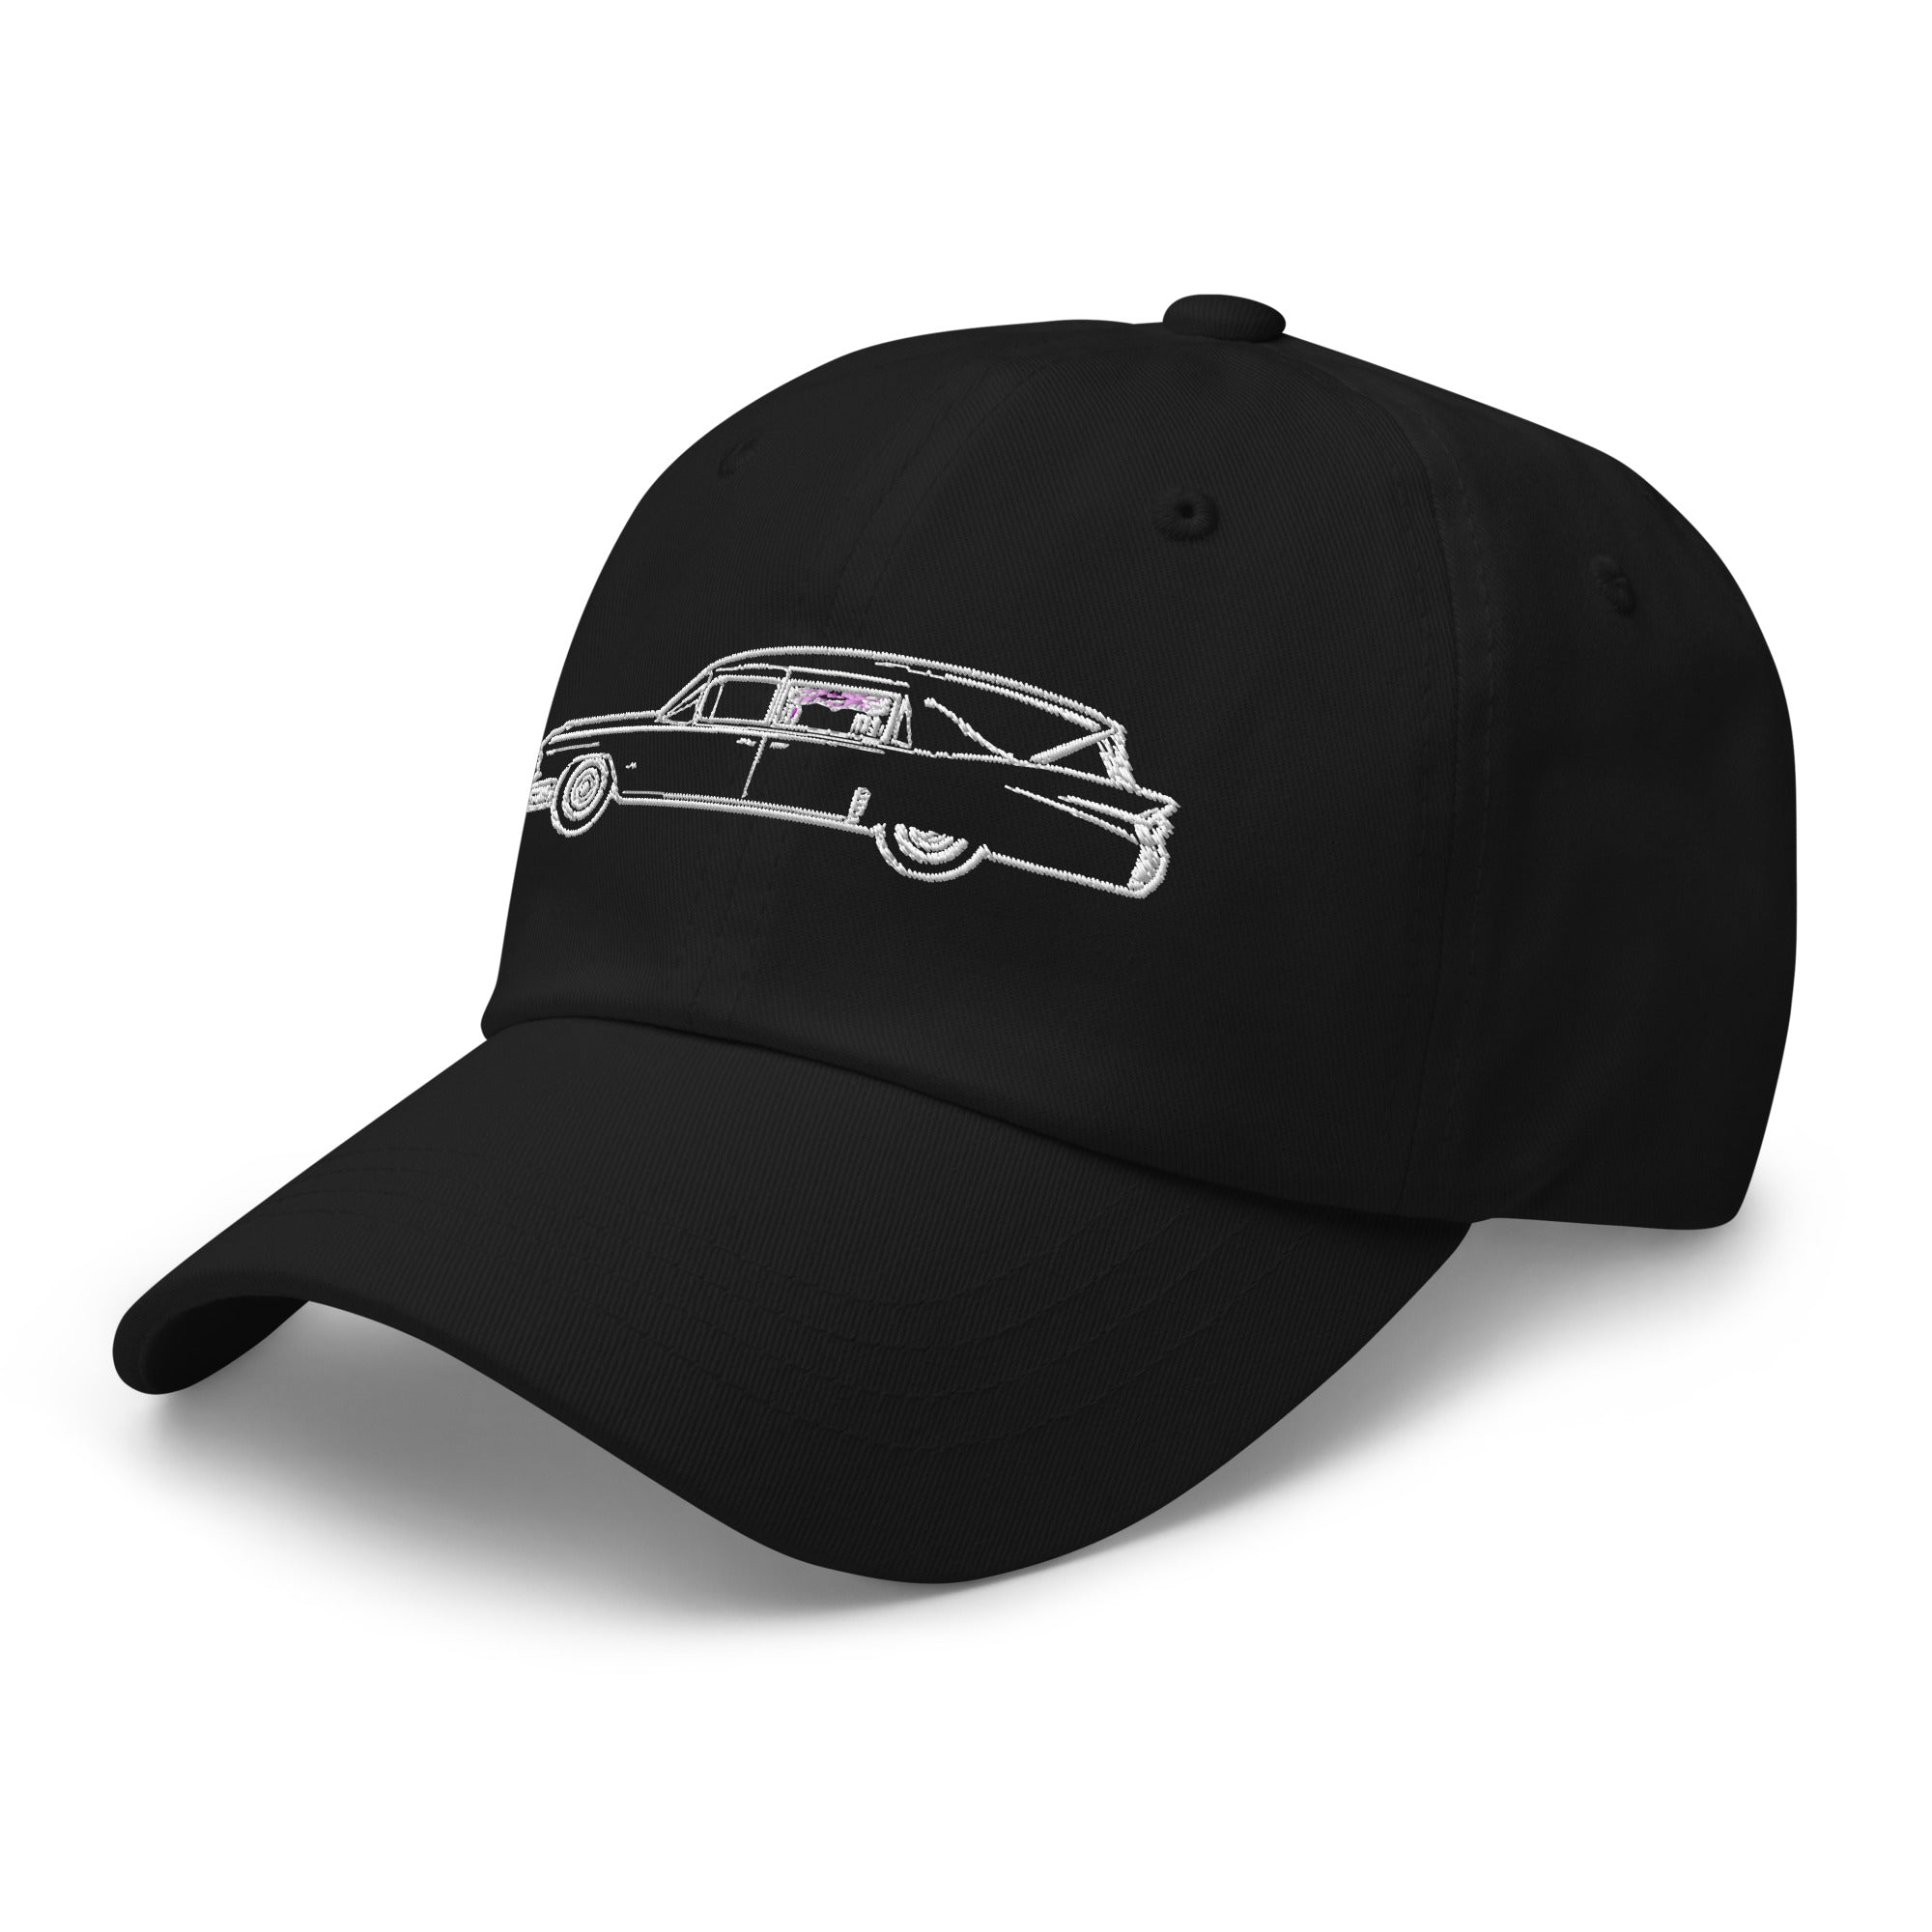 Hearse Funeral Car Embroidered Baseball Cap Casket Coach Dad hat - Edge of Life Designs